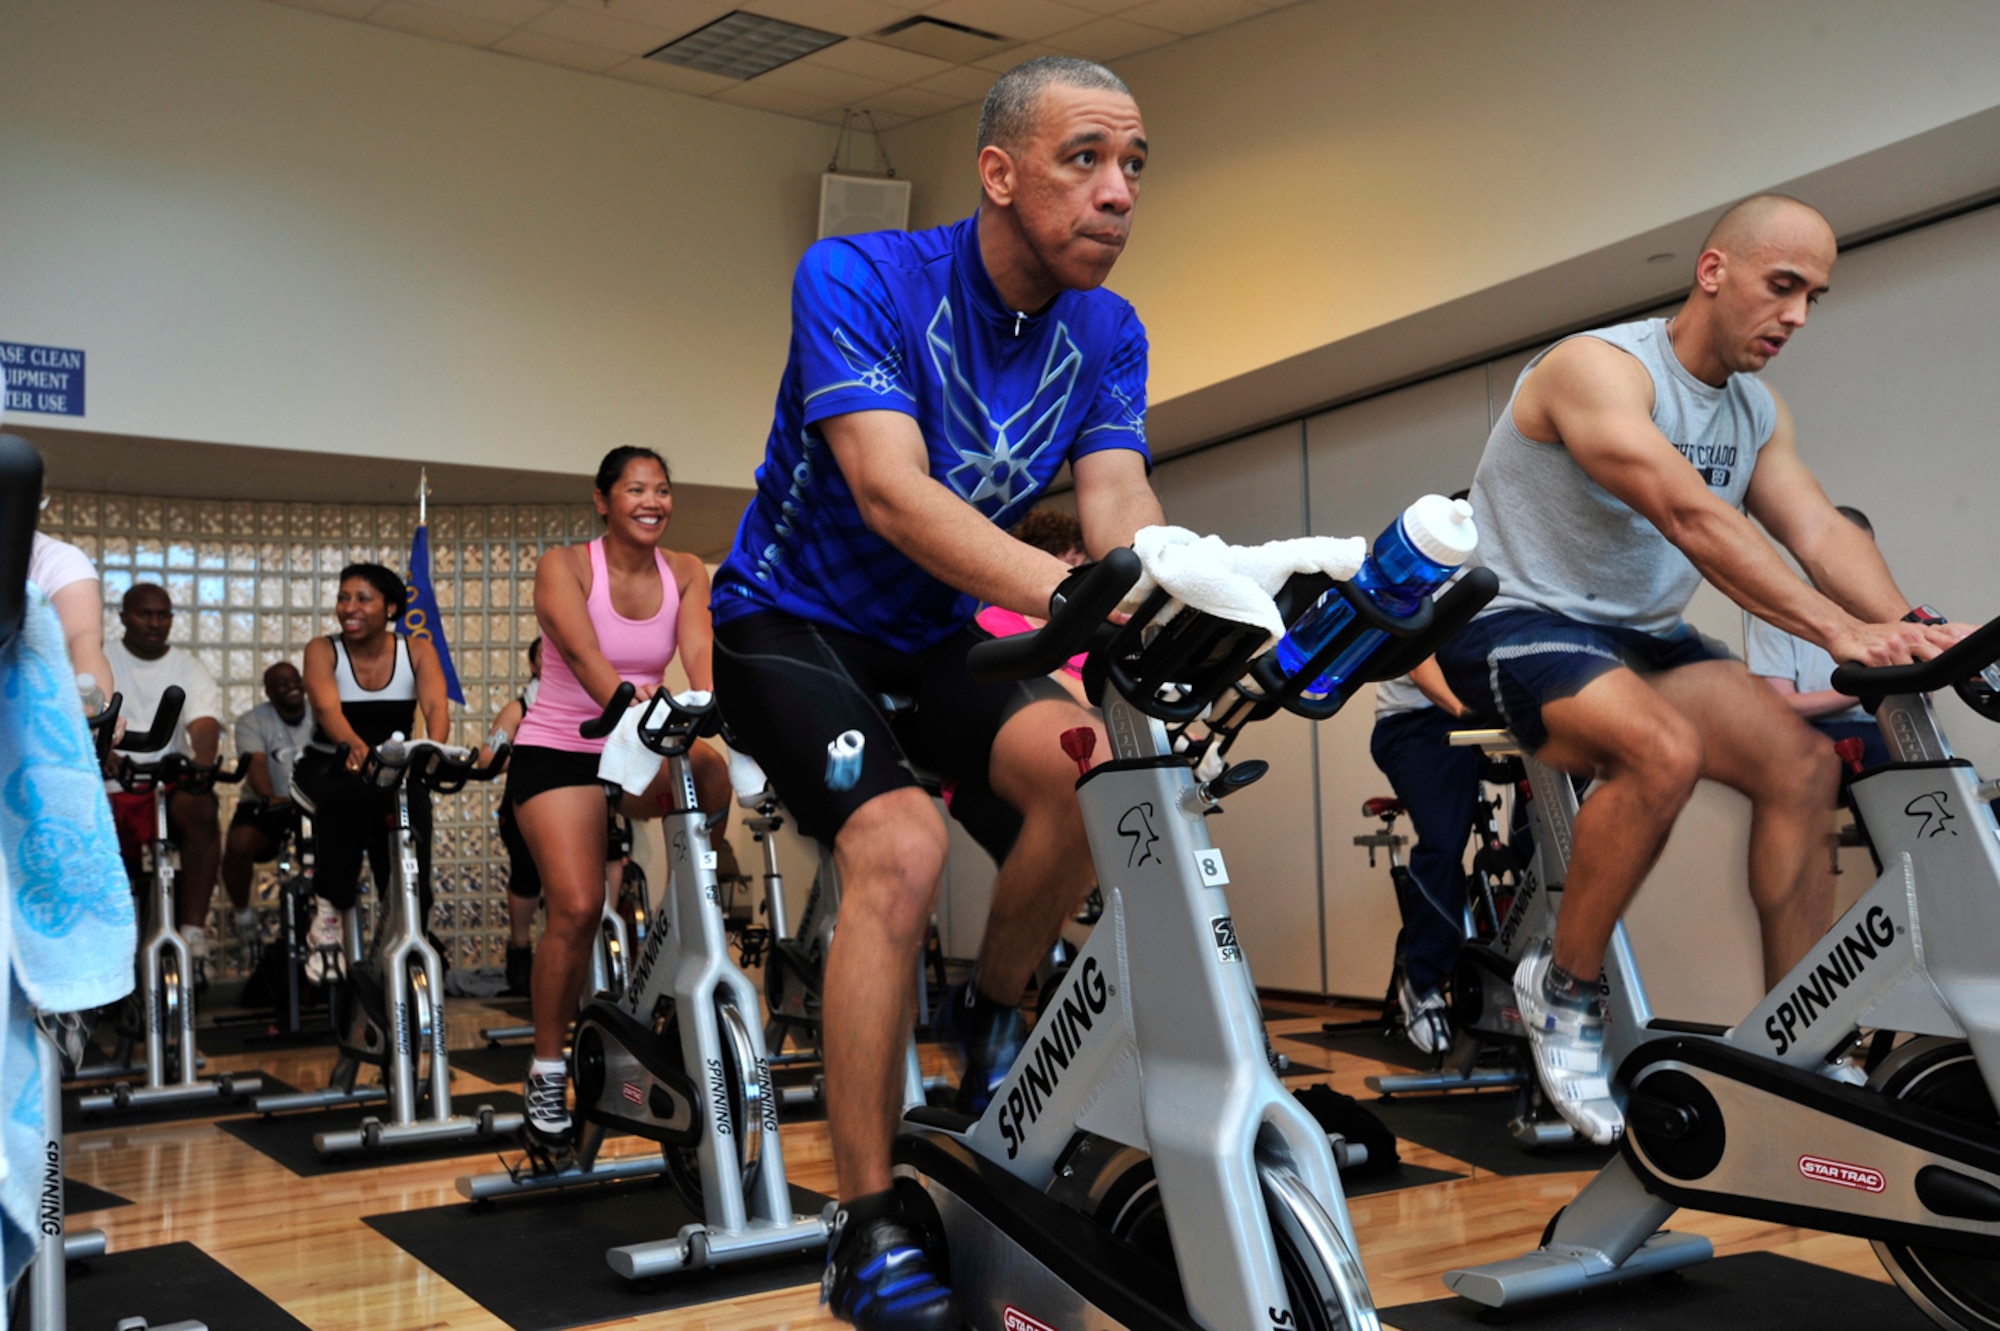 BUCKLEY AIR FORCE BASE, Colo. -- Col. Vincent Jefferson, Misson Support Group Commander, cycles for 12 hours during Buckley's inaugural Spinathon March 19. Col. Jefferson frequents the spin classes daily where he and his spouse, Sandra Jefferson, are also instructors. (U.S. Air Force photo by Senior Airman Alex Gochnour)